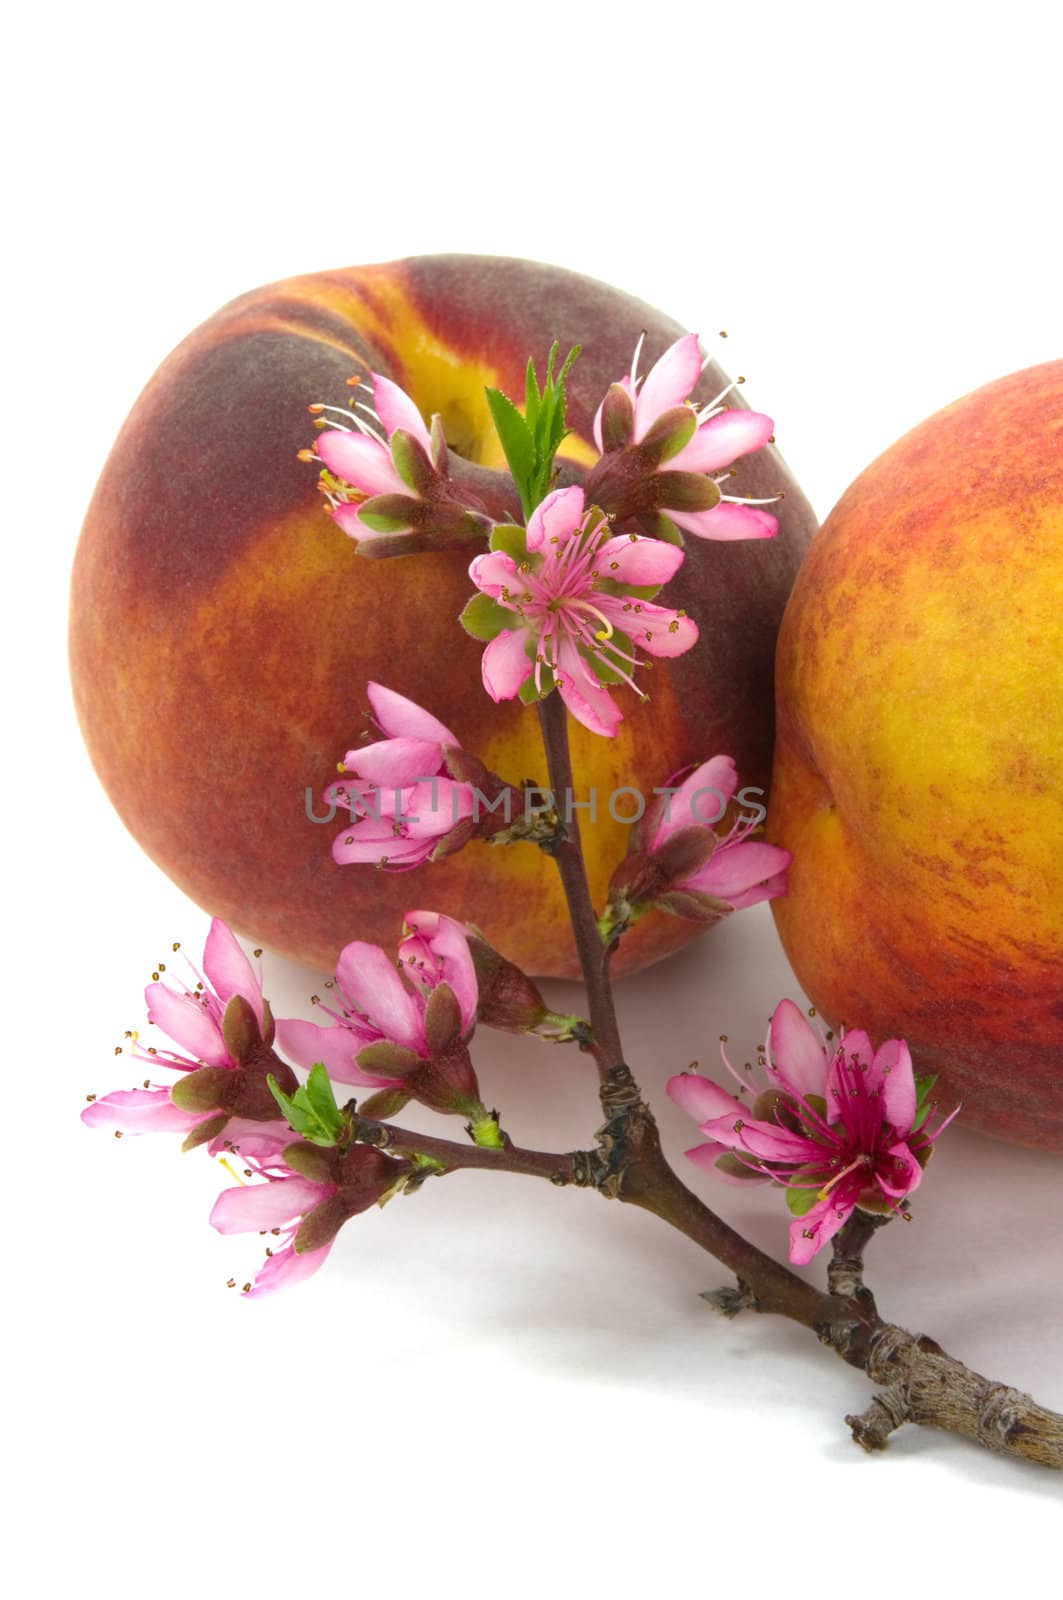 Peach fruit and blossom in spring with white background